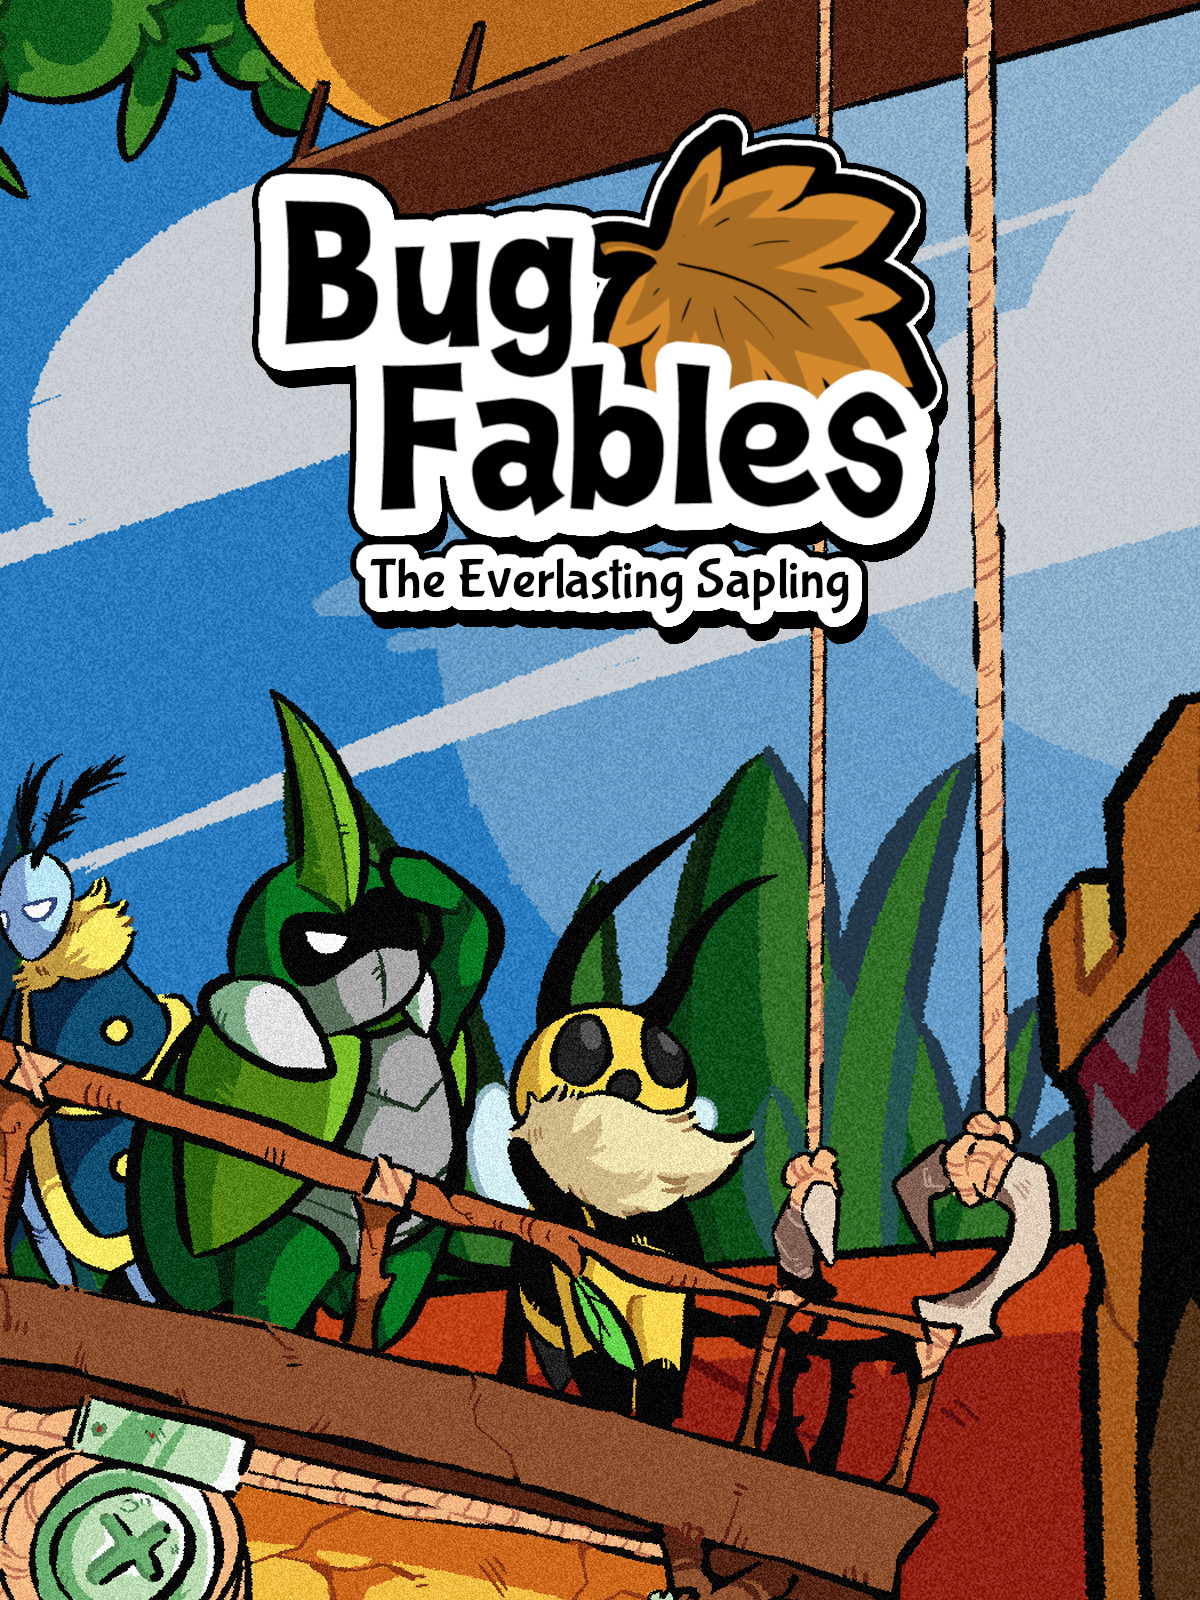 Bug fables mods